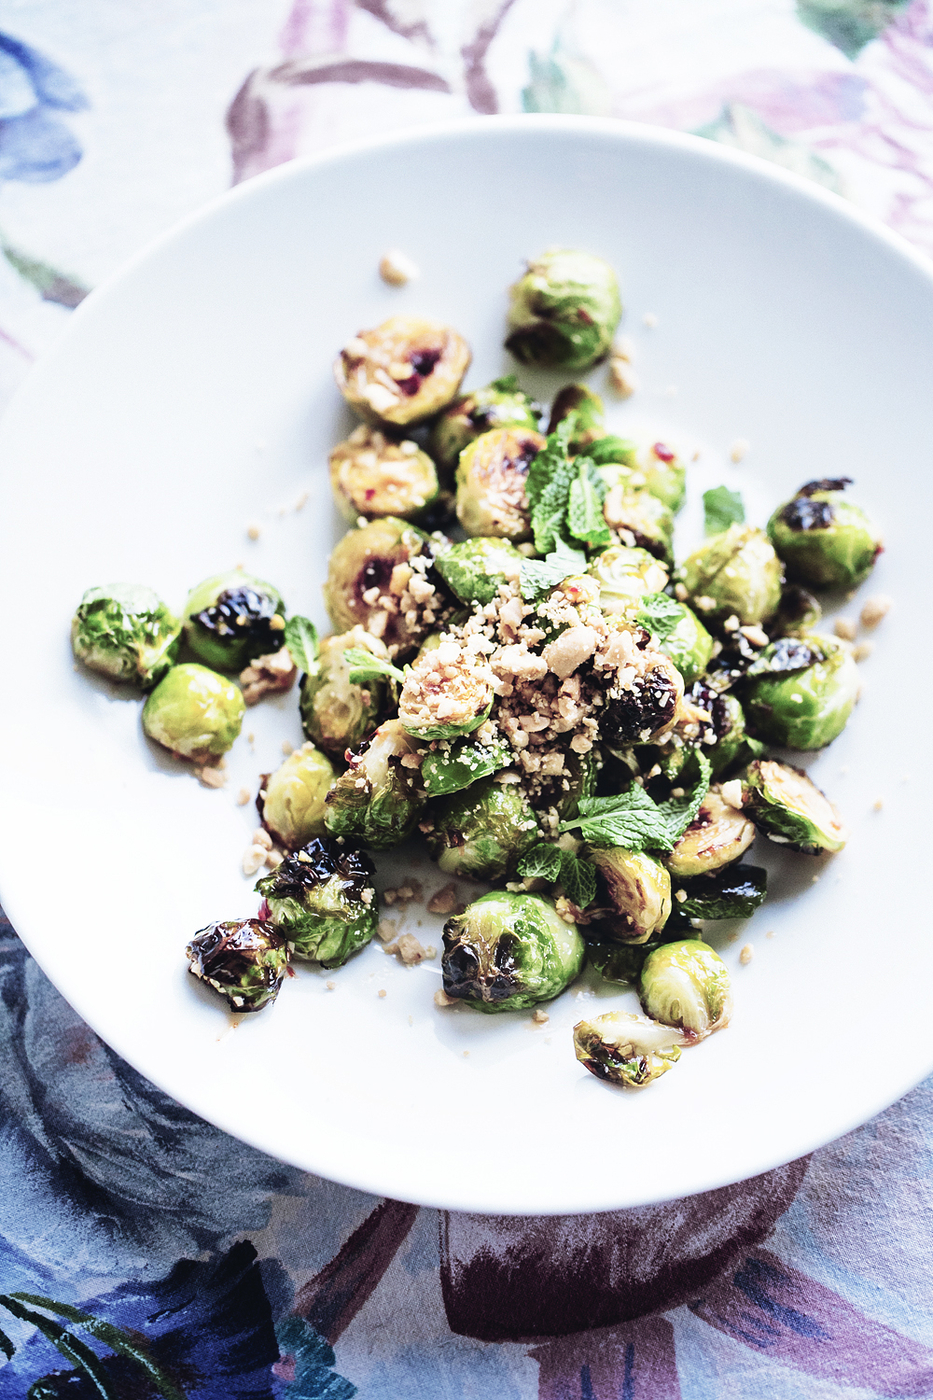 Tahmaruusukaalit / Asian inspired brussels sprouts